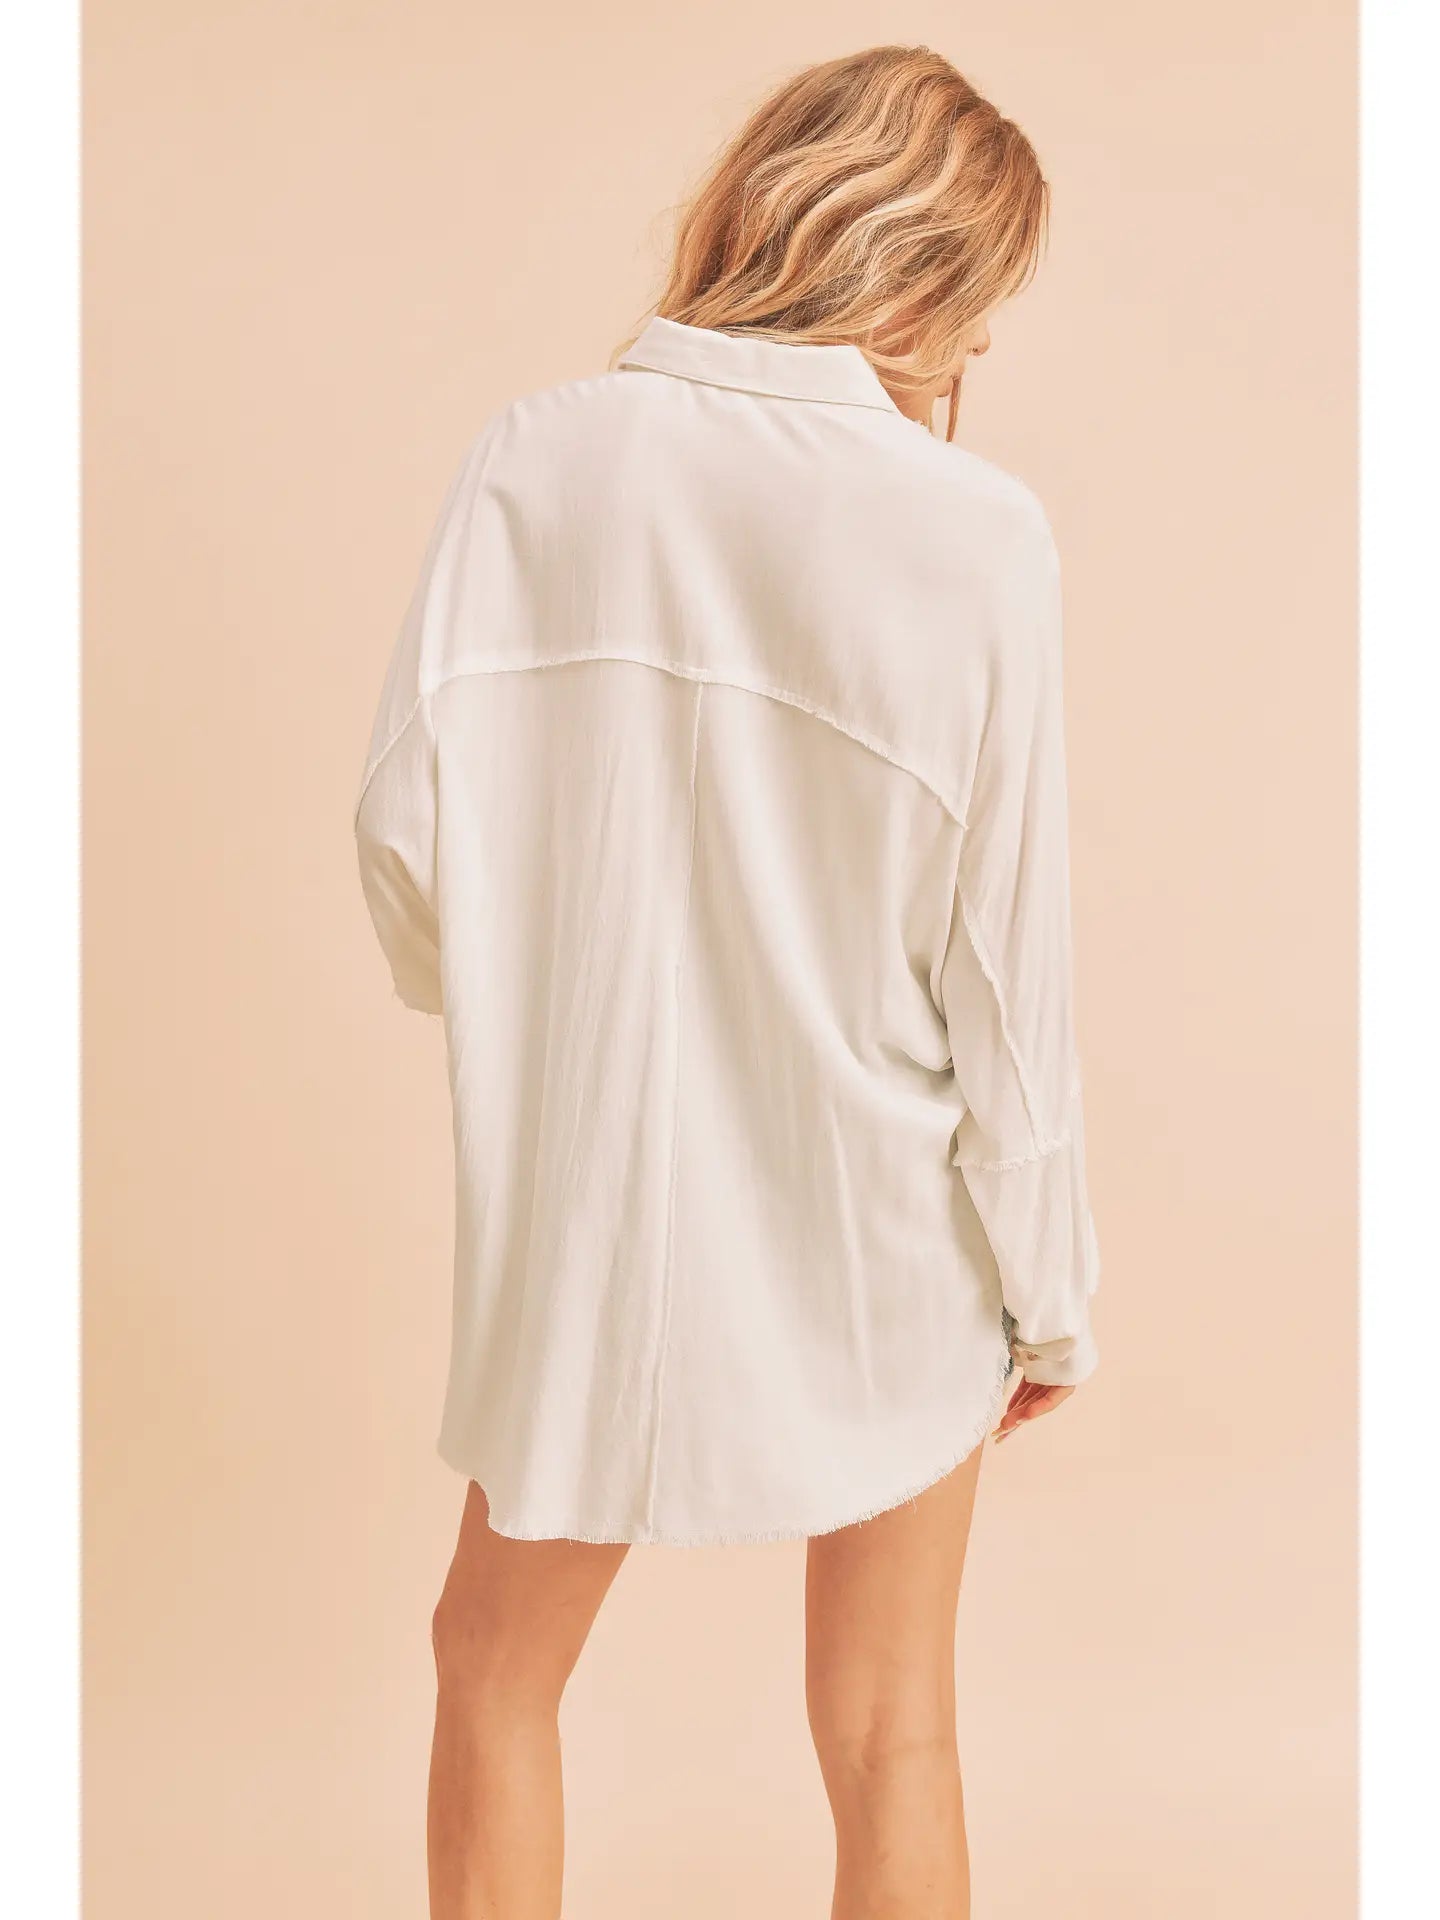 The Delilah Top-Ivory